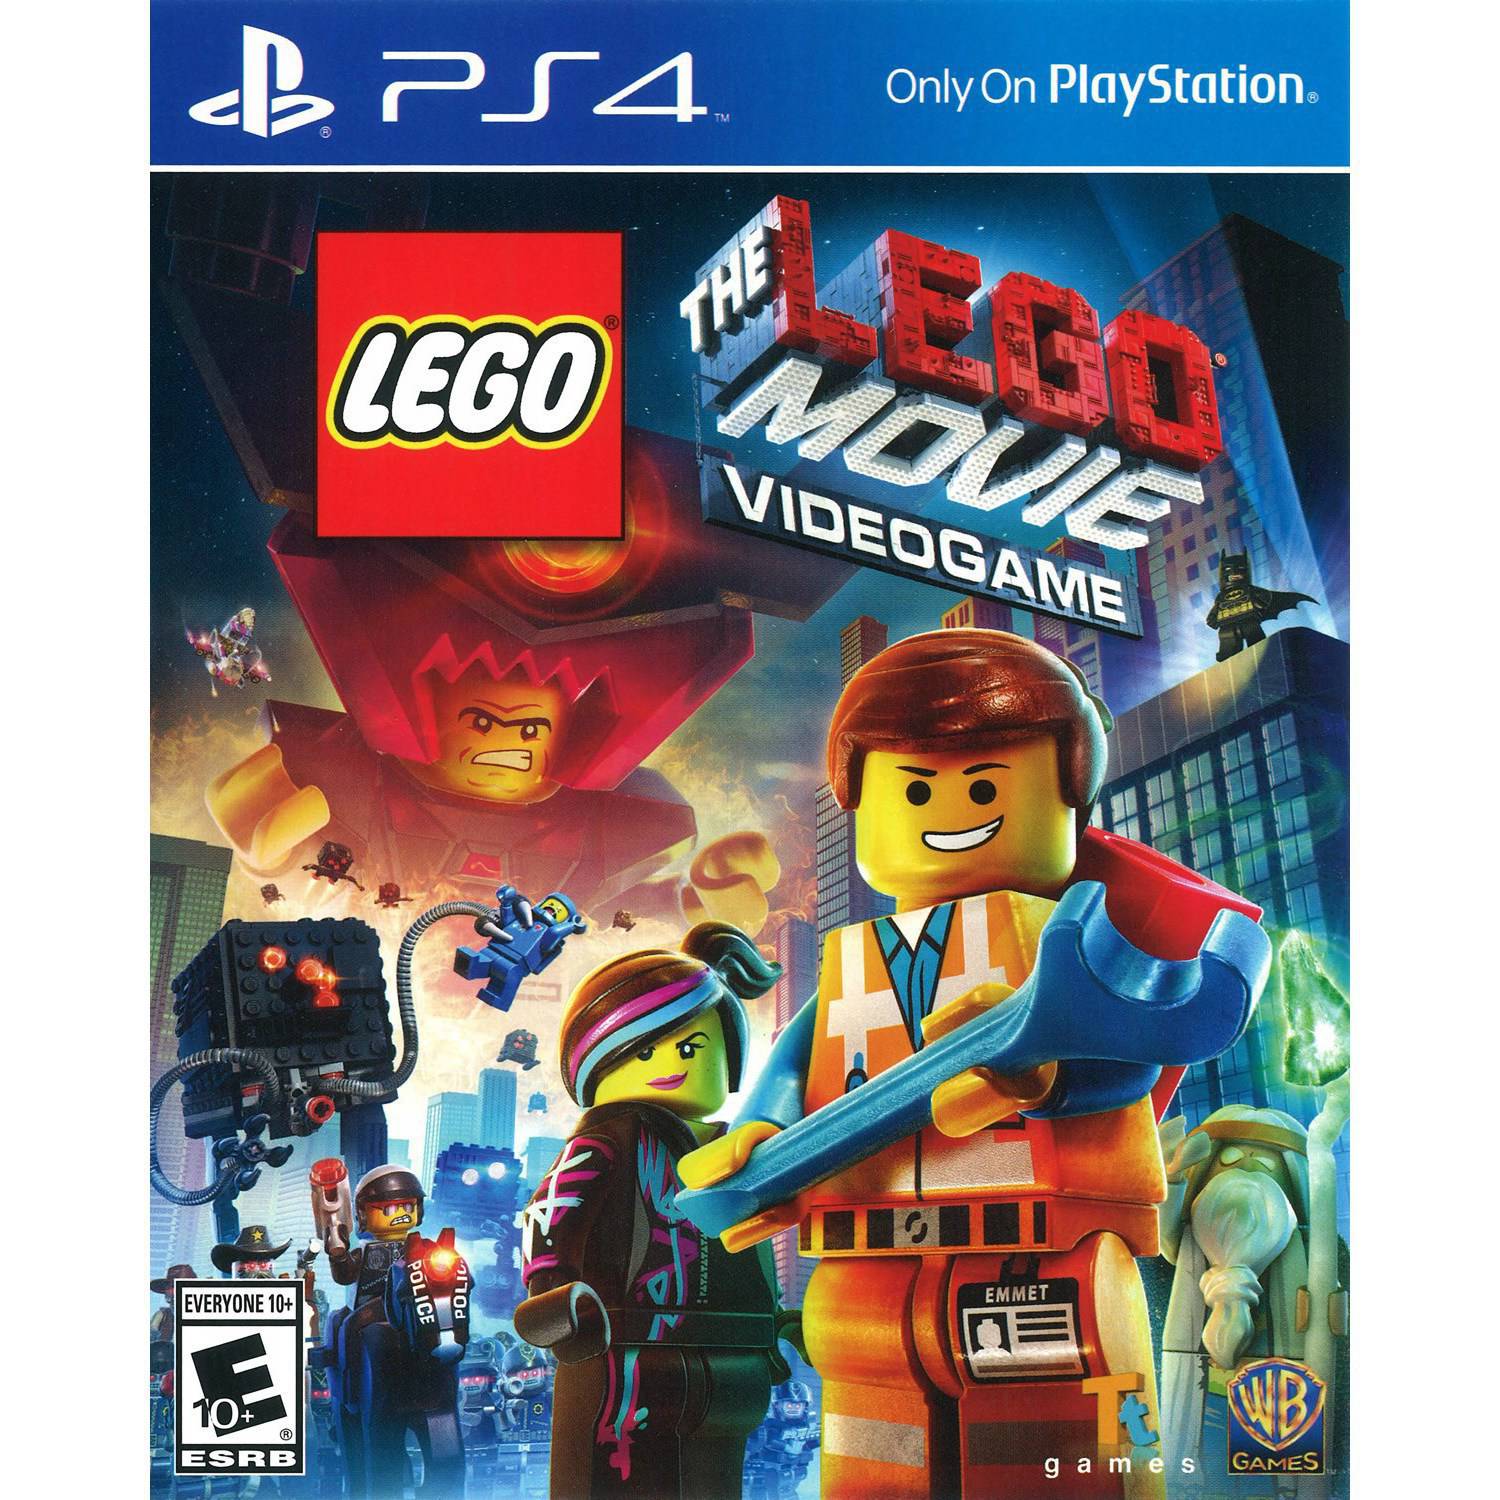 The LEGO Movie Videogame HD wallpapers, Desktop wallpaper - most viewed